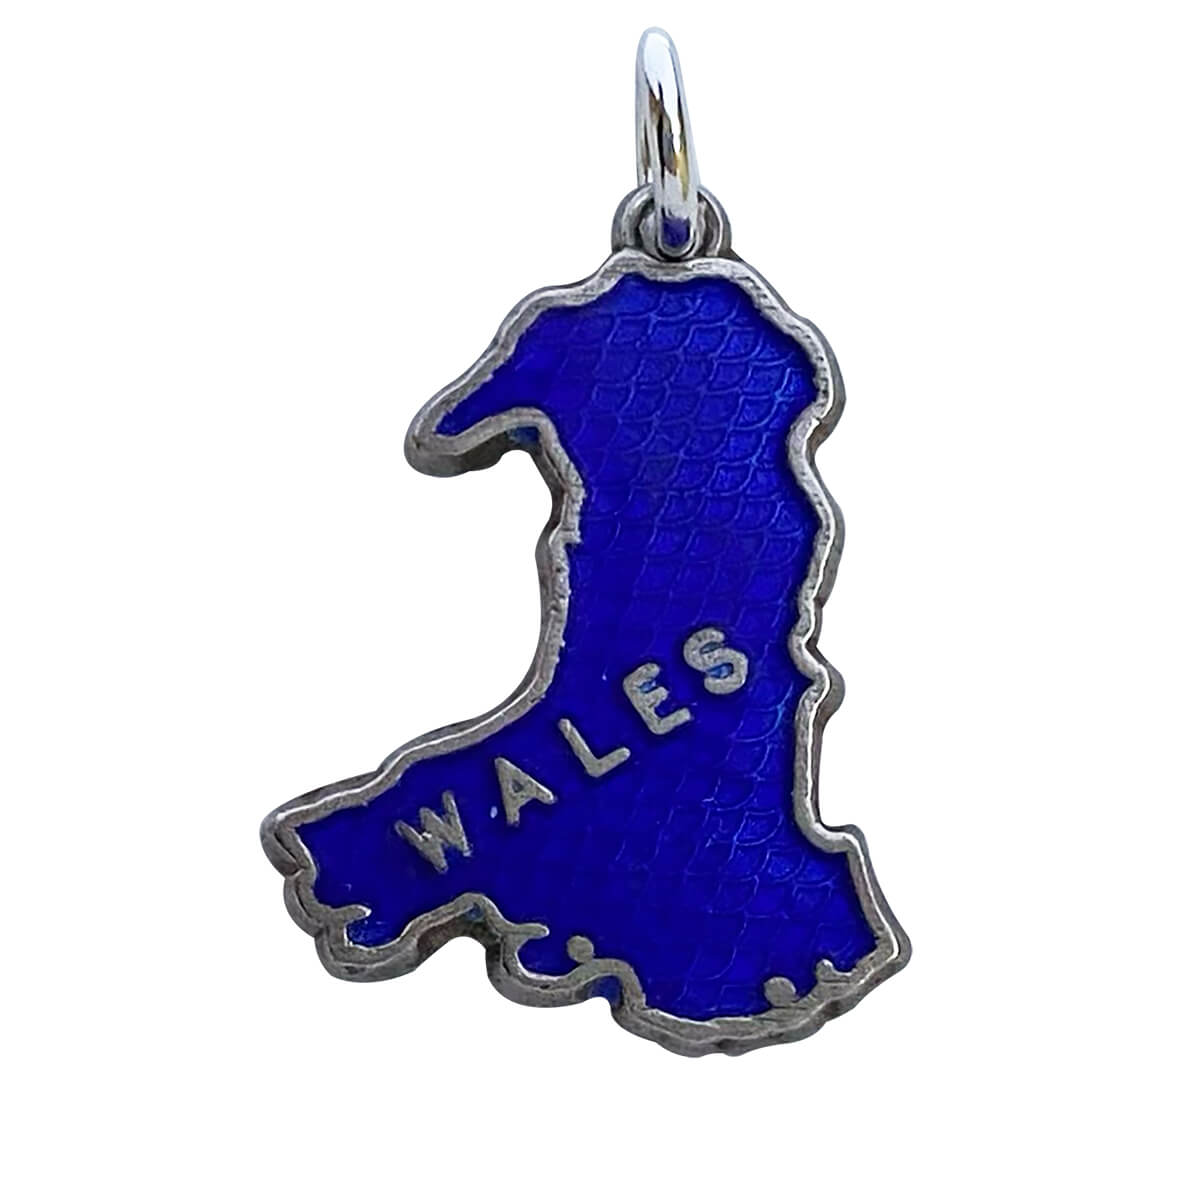 English silver and blue enamel map of Wales charm vintage 1966